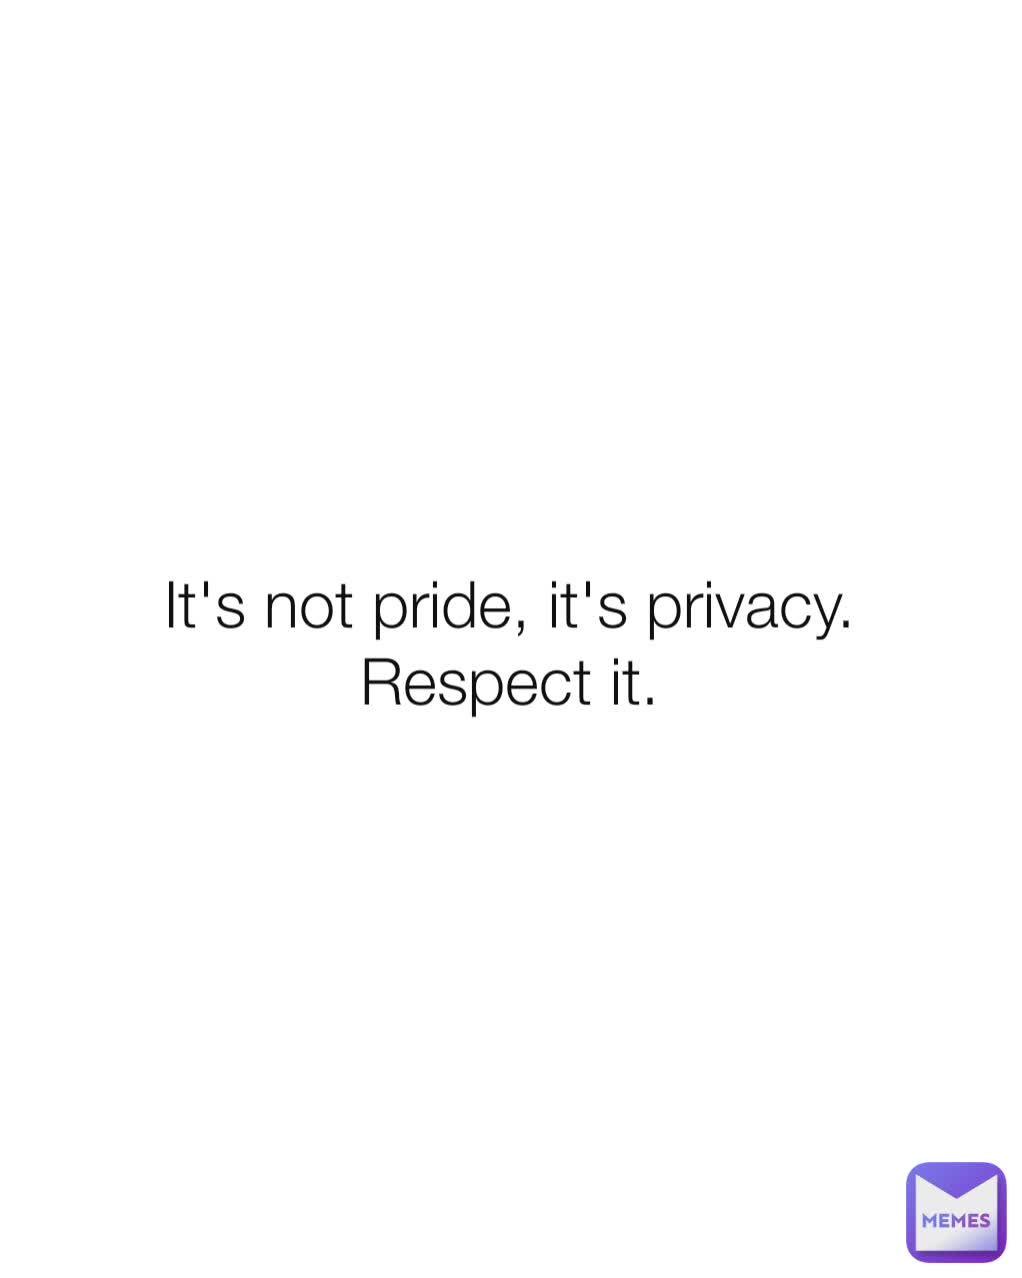 It's not pride, it's privacy.
Respect it.